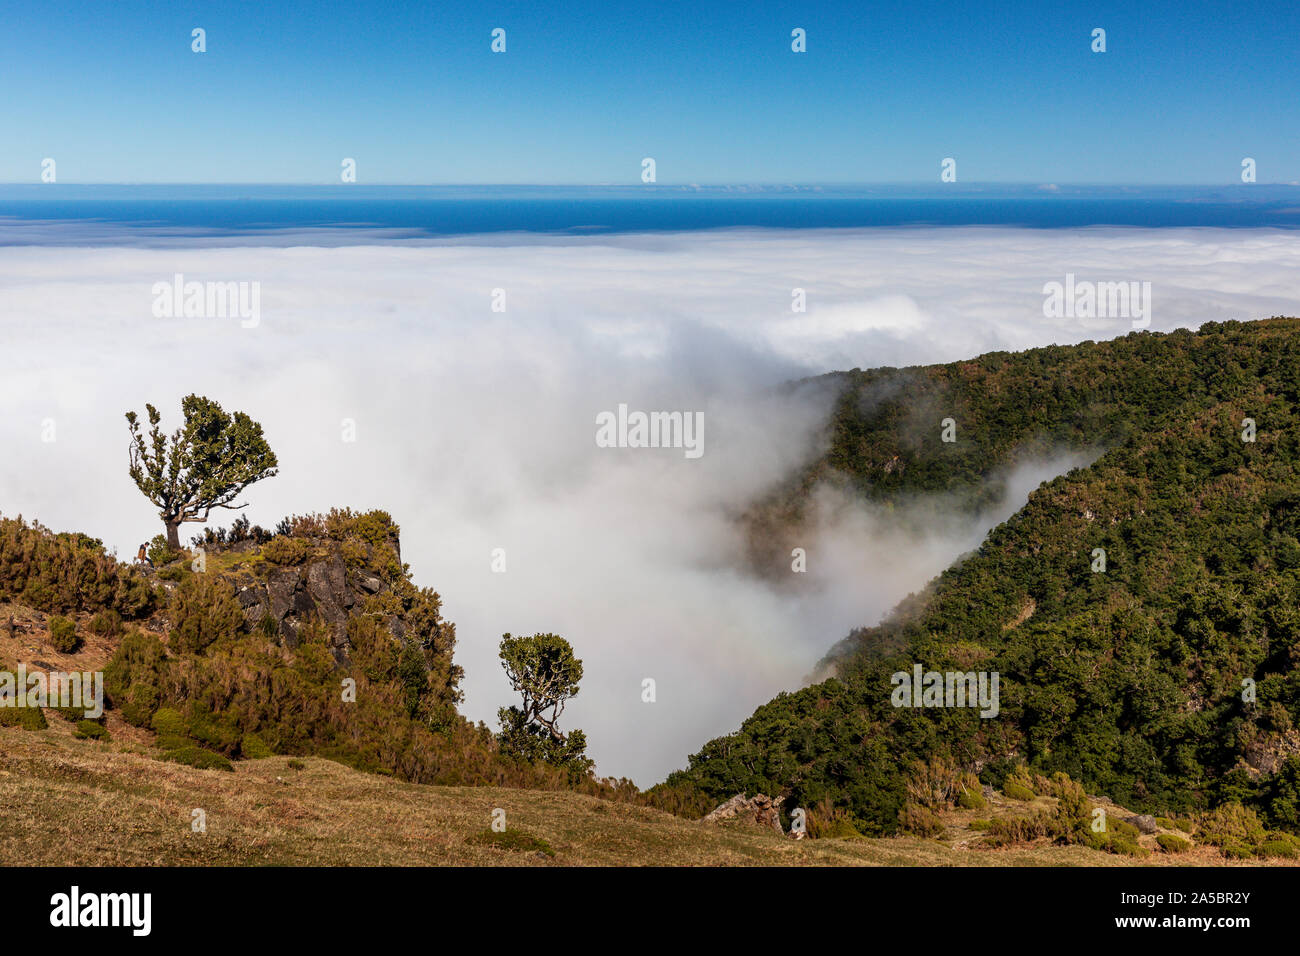 Ancient laurel forest with approaching clouds, Fanal, Madeira. UNESCO World Heritage Site Stock Photo